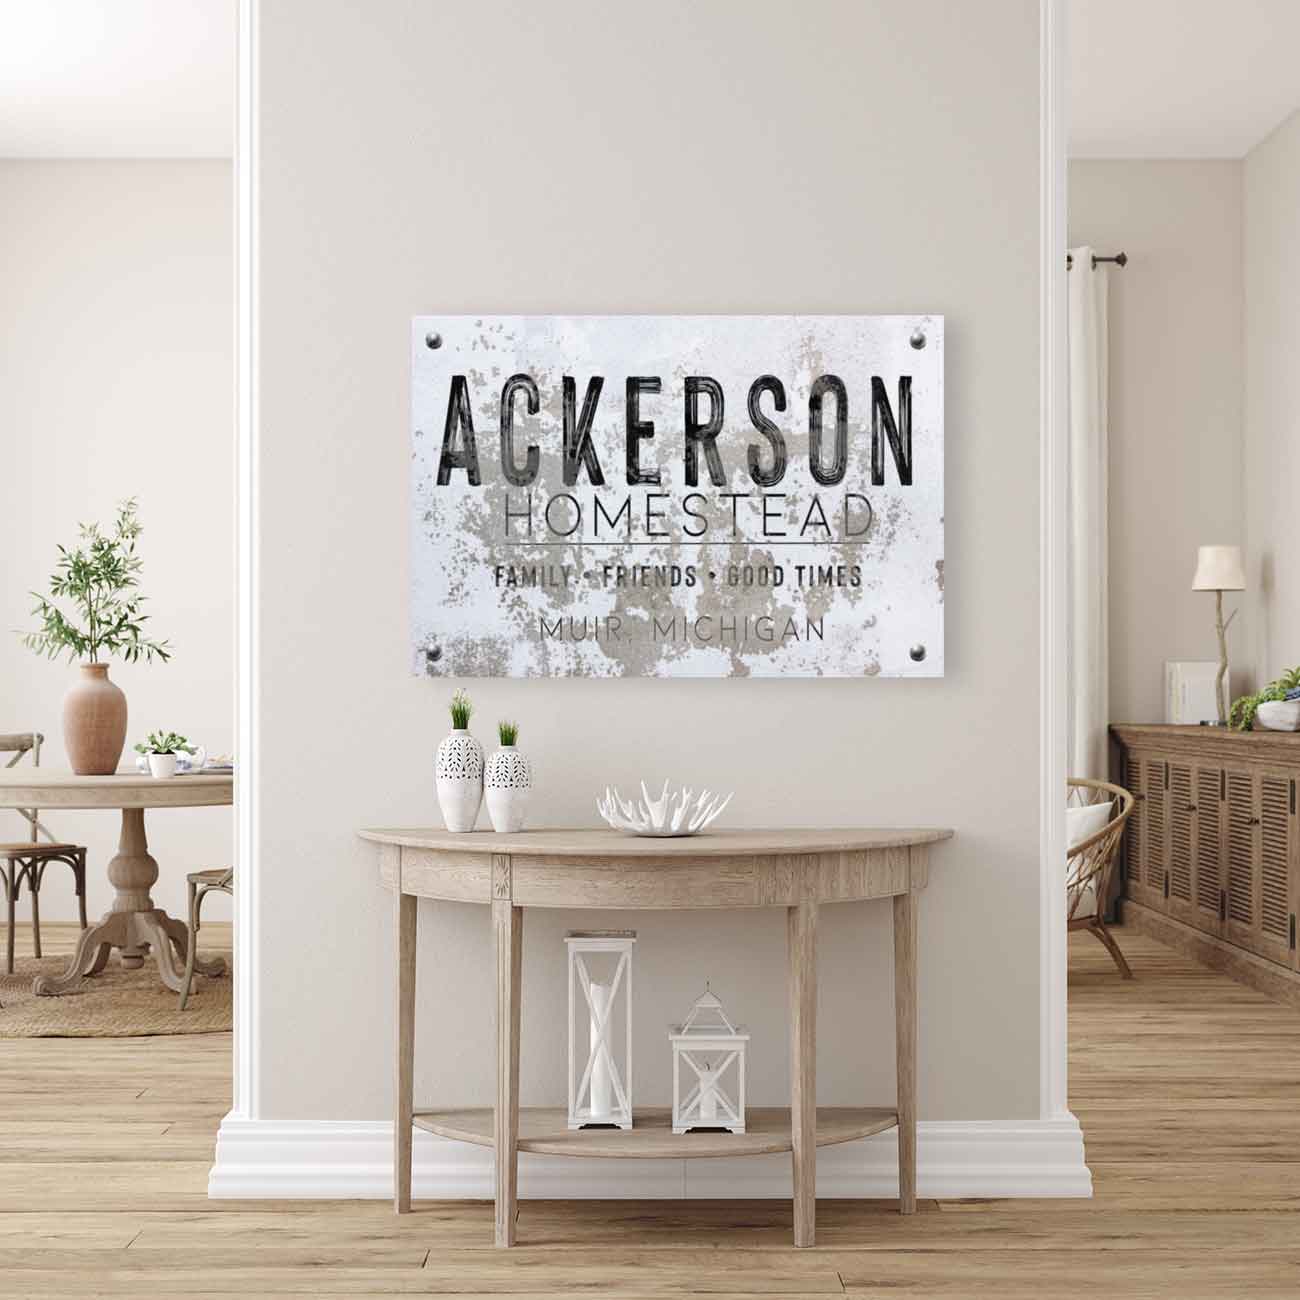 industrial farmhouse wall decor sign on faux stone background: (family name) Homestead, family, friends, good times.